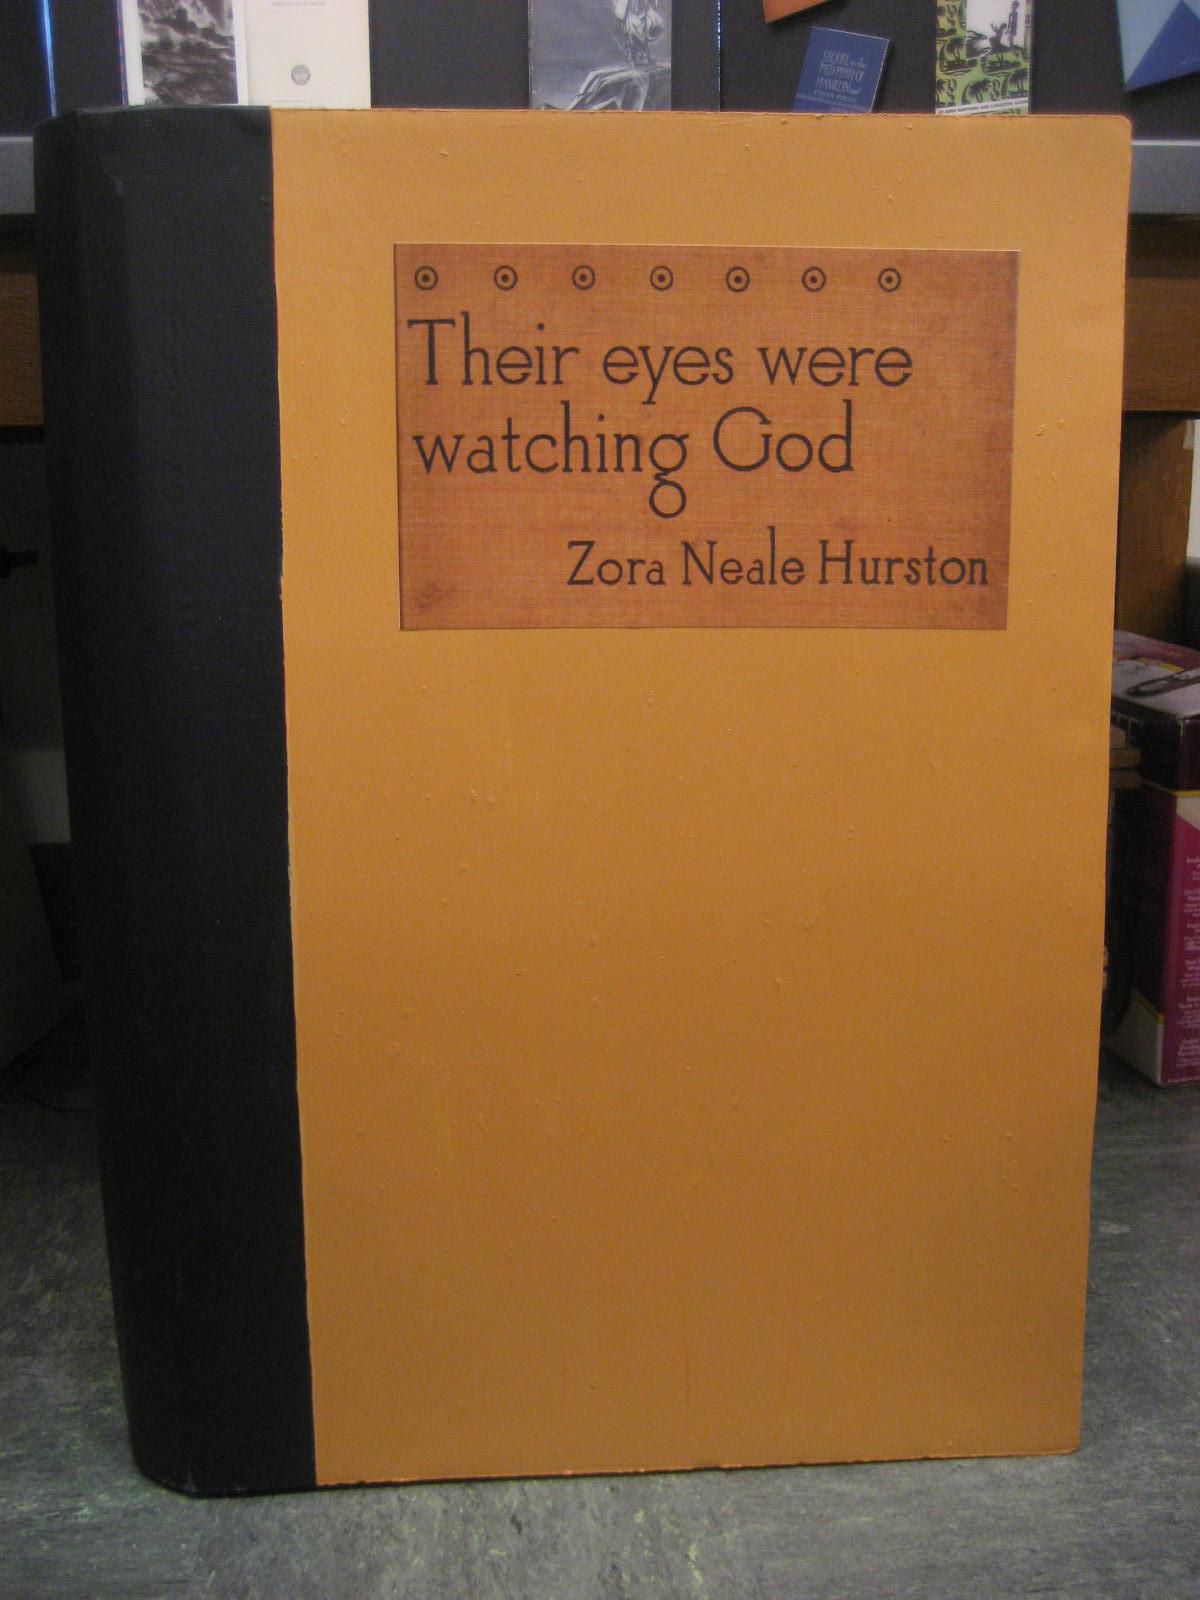 Moving Quotes from Zora Neale Hurston s Classic